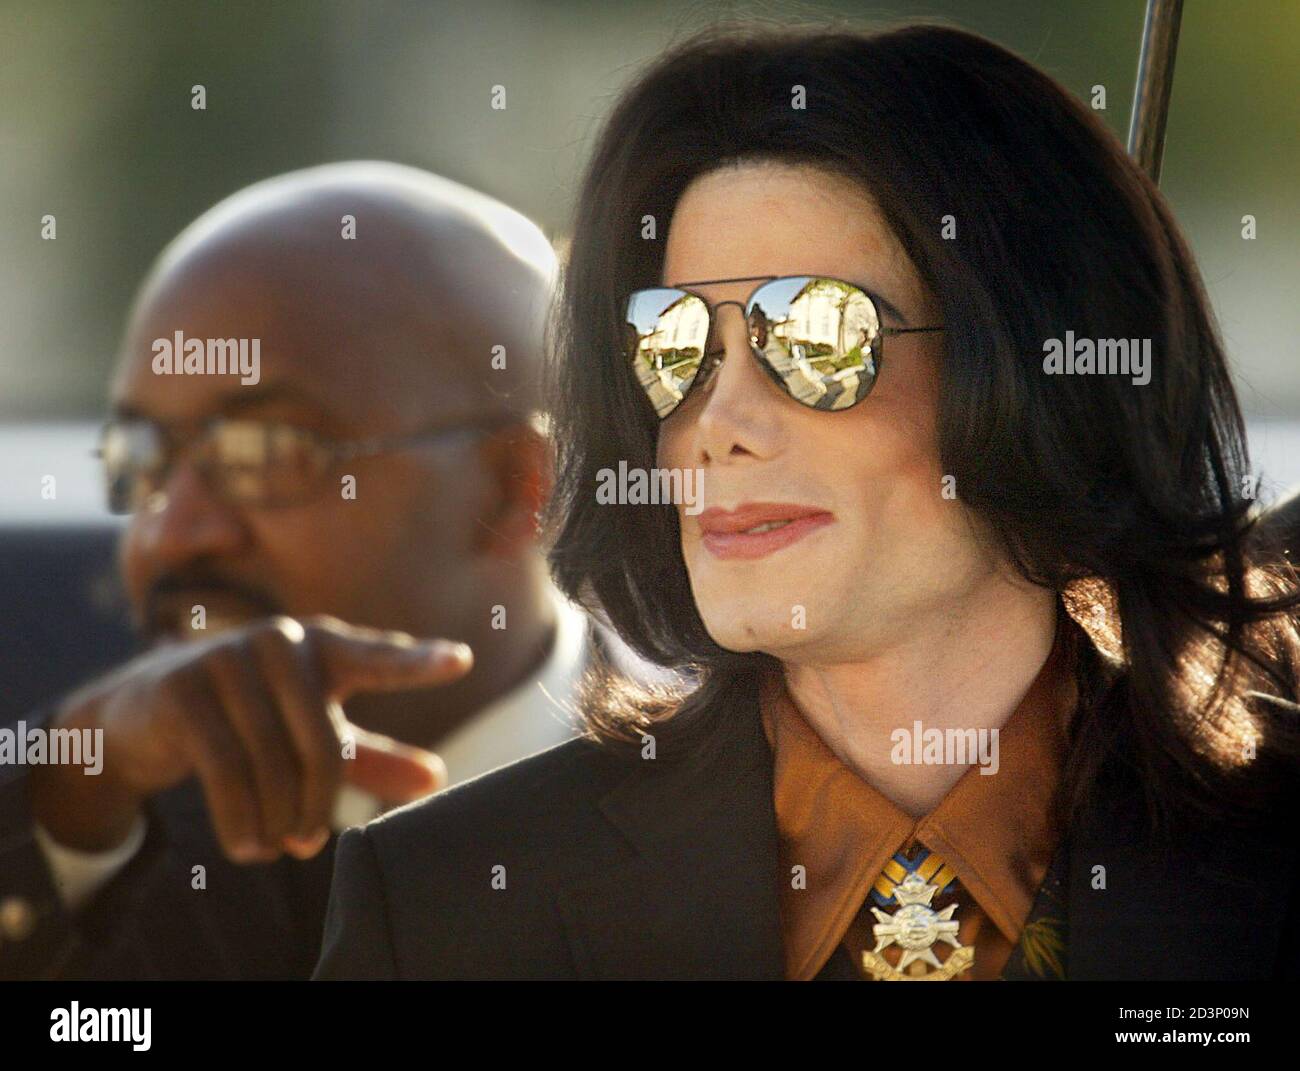 Michael Jackson arrives at Santa Barbara County Superior Court in Santa  Maria, California, February 24, 2005. The long delayed Jackson child  molestation trial was set to begin in earnest with opening statements